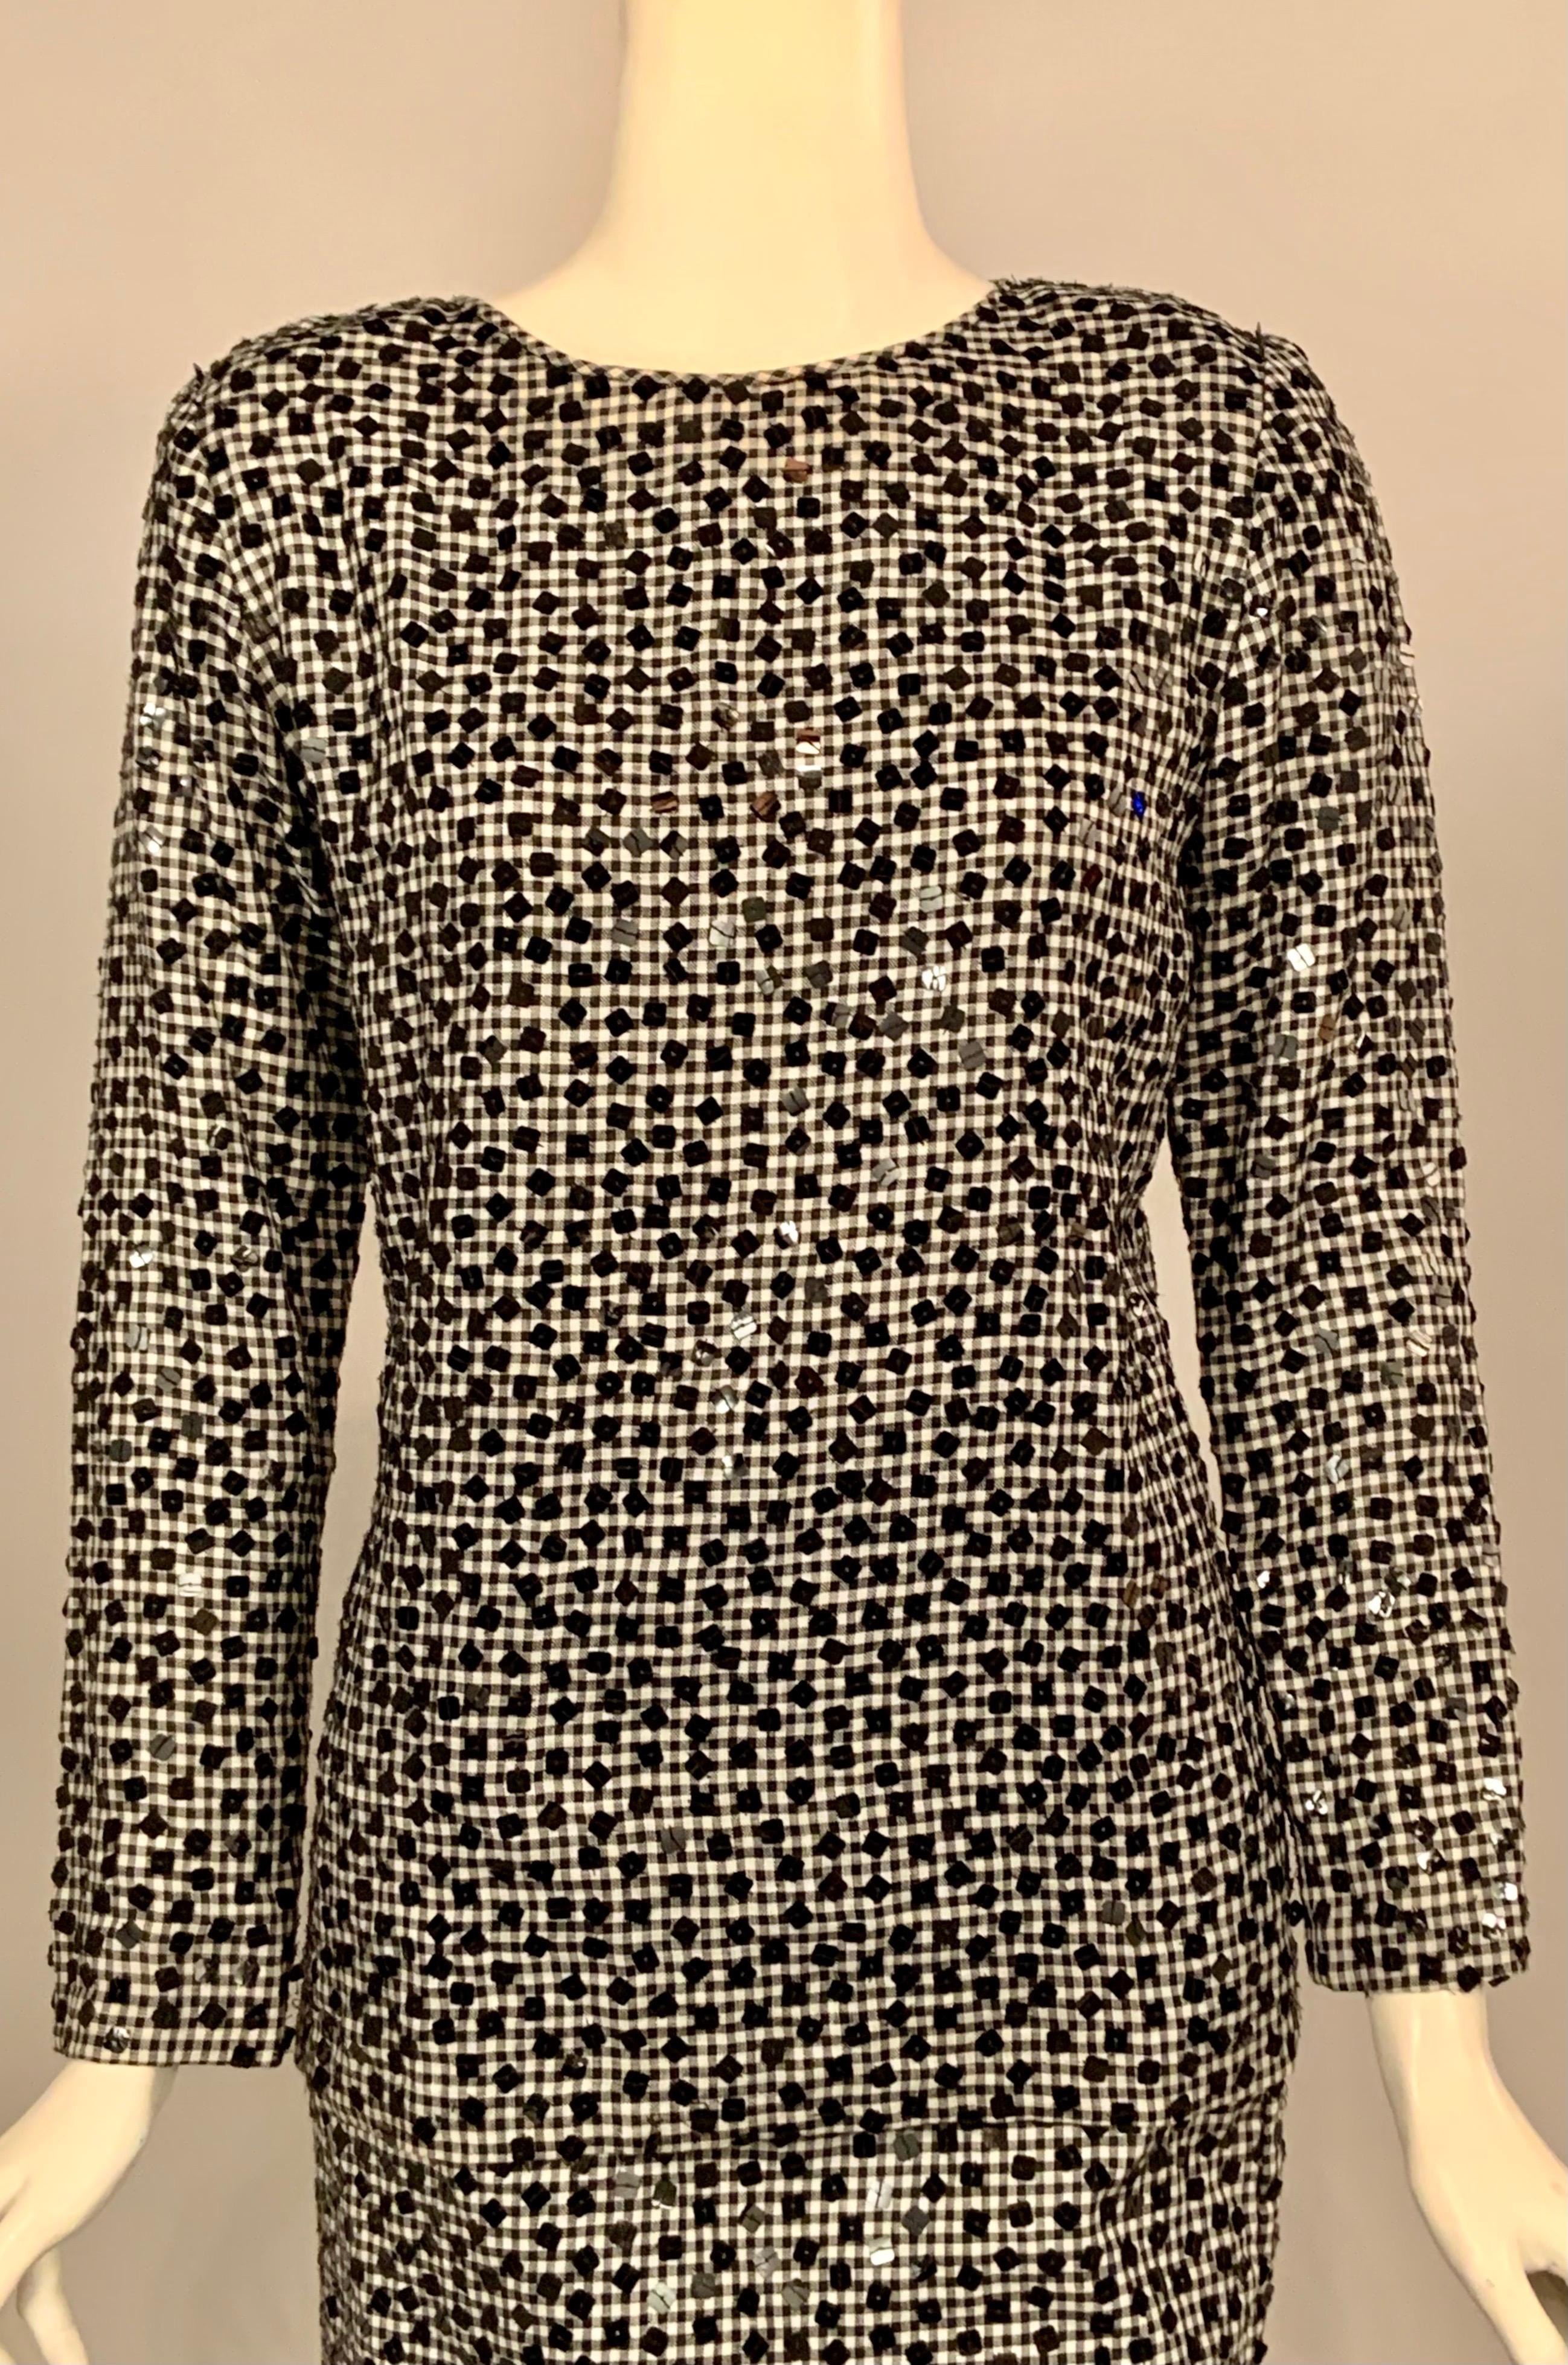 Bill Blass used the unusual combination of black and white gingham and square black sequins to create this two piece dress that takes you from drinks to dinner in style.   The top has a round neckline, long sleeves, buttons at the wrists and an